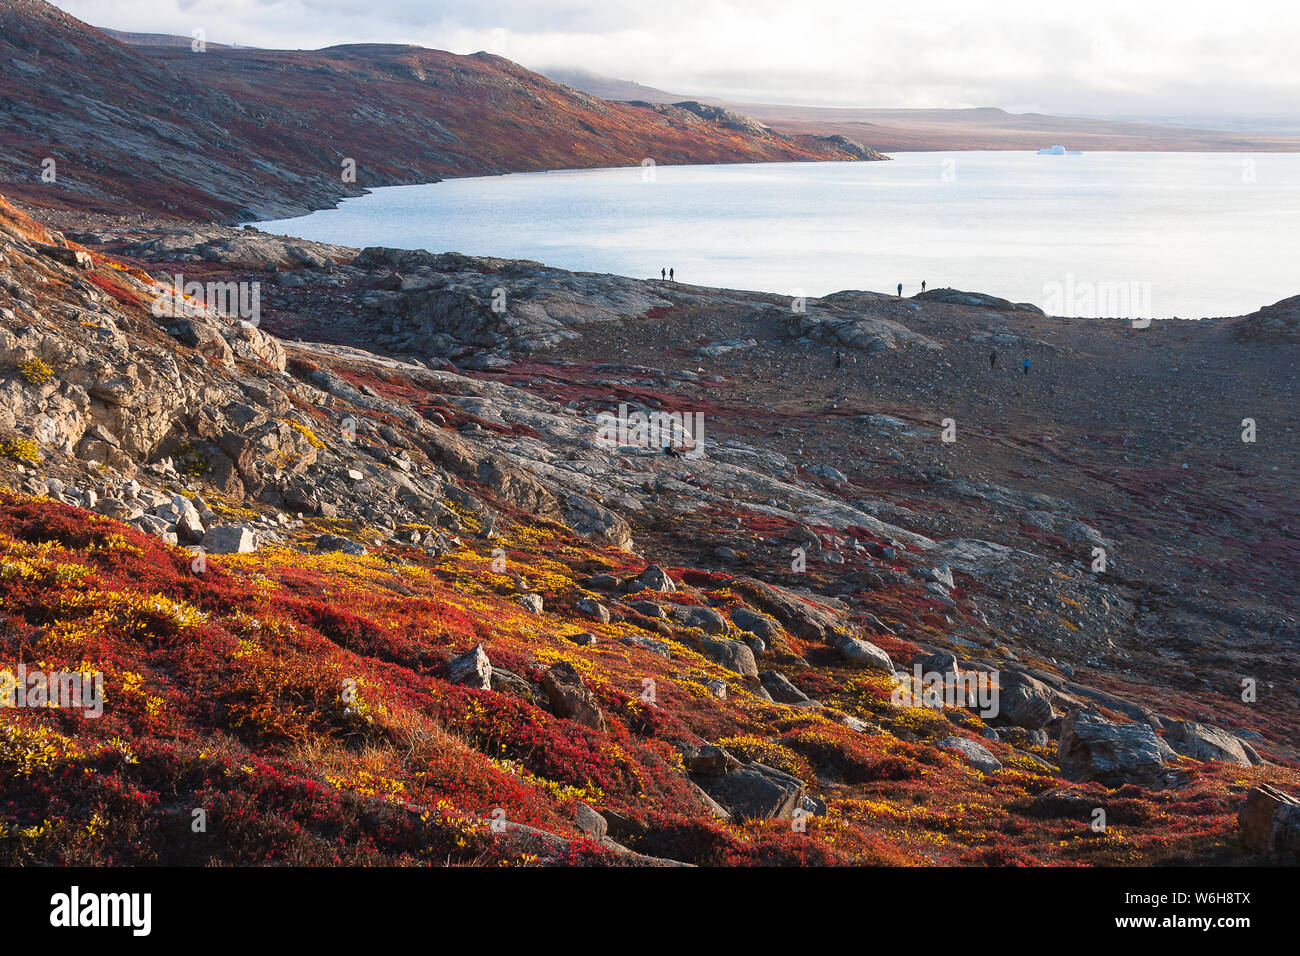 Wanderers explore the bay at Sydkap, eastern Greenland, surrounded by vibrant tundra vegetation. Stock Photo